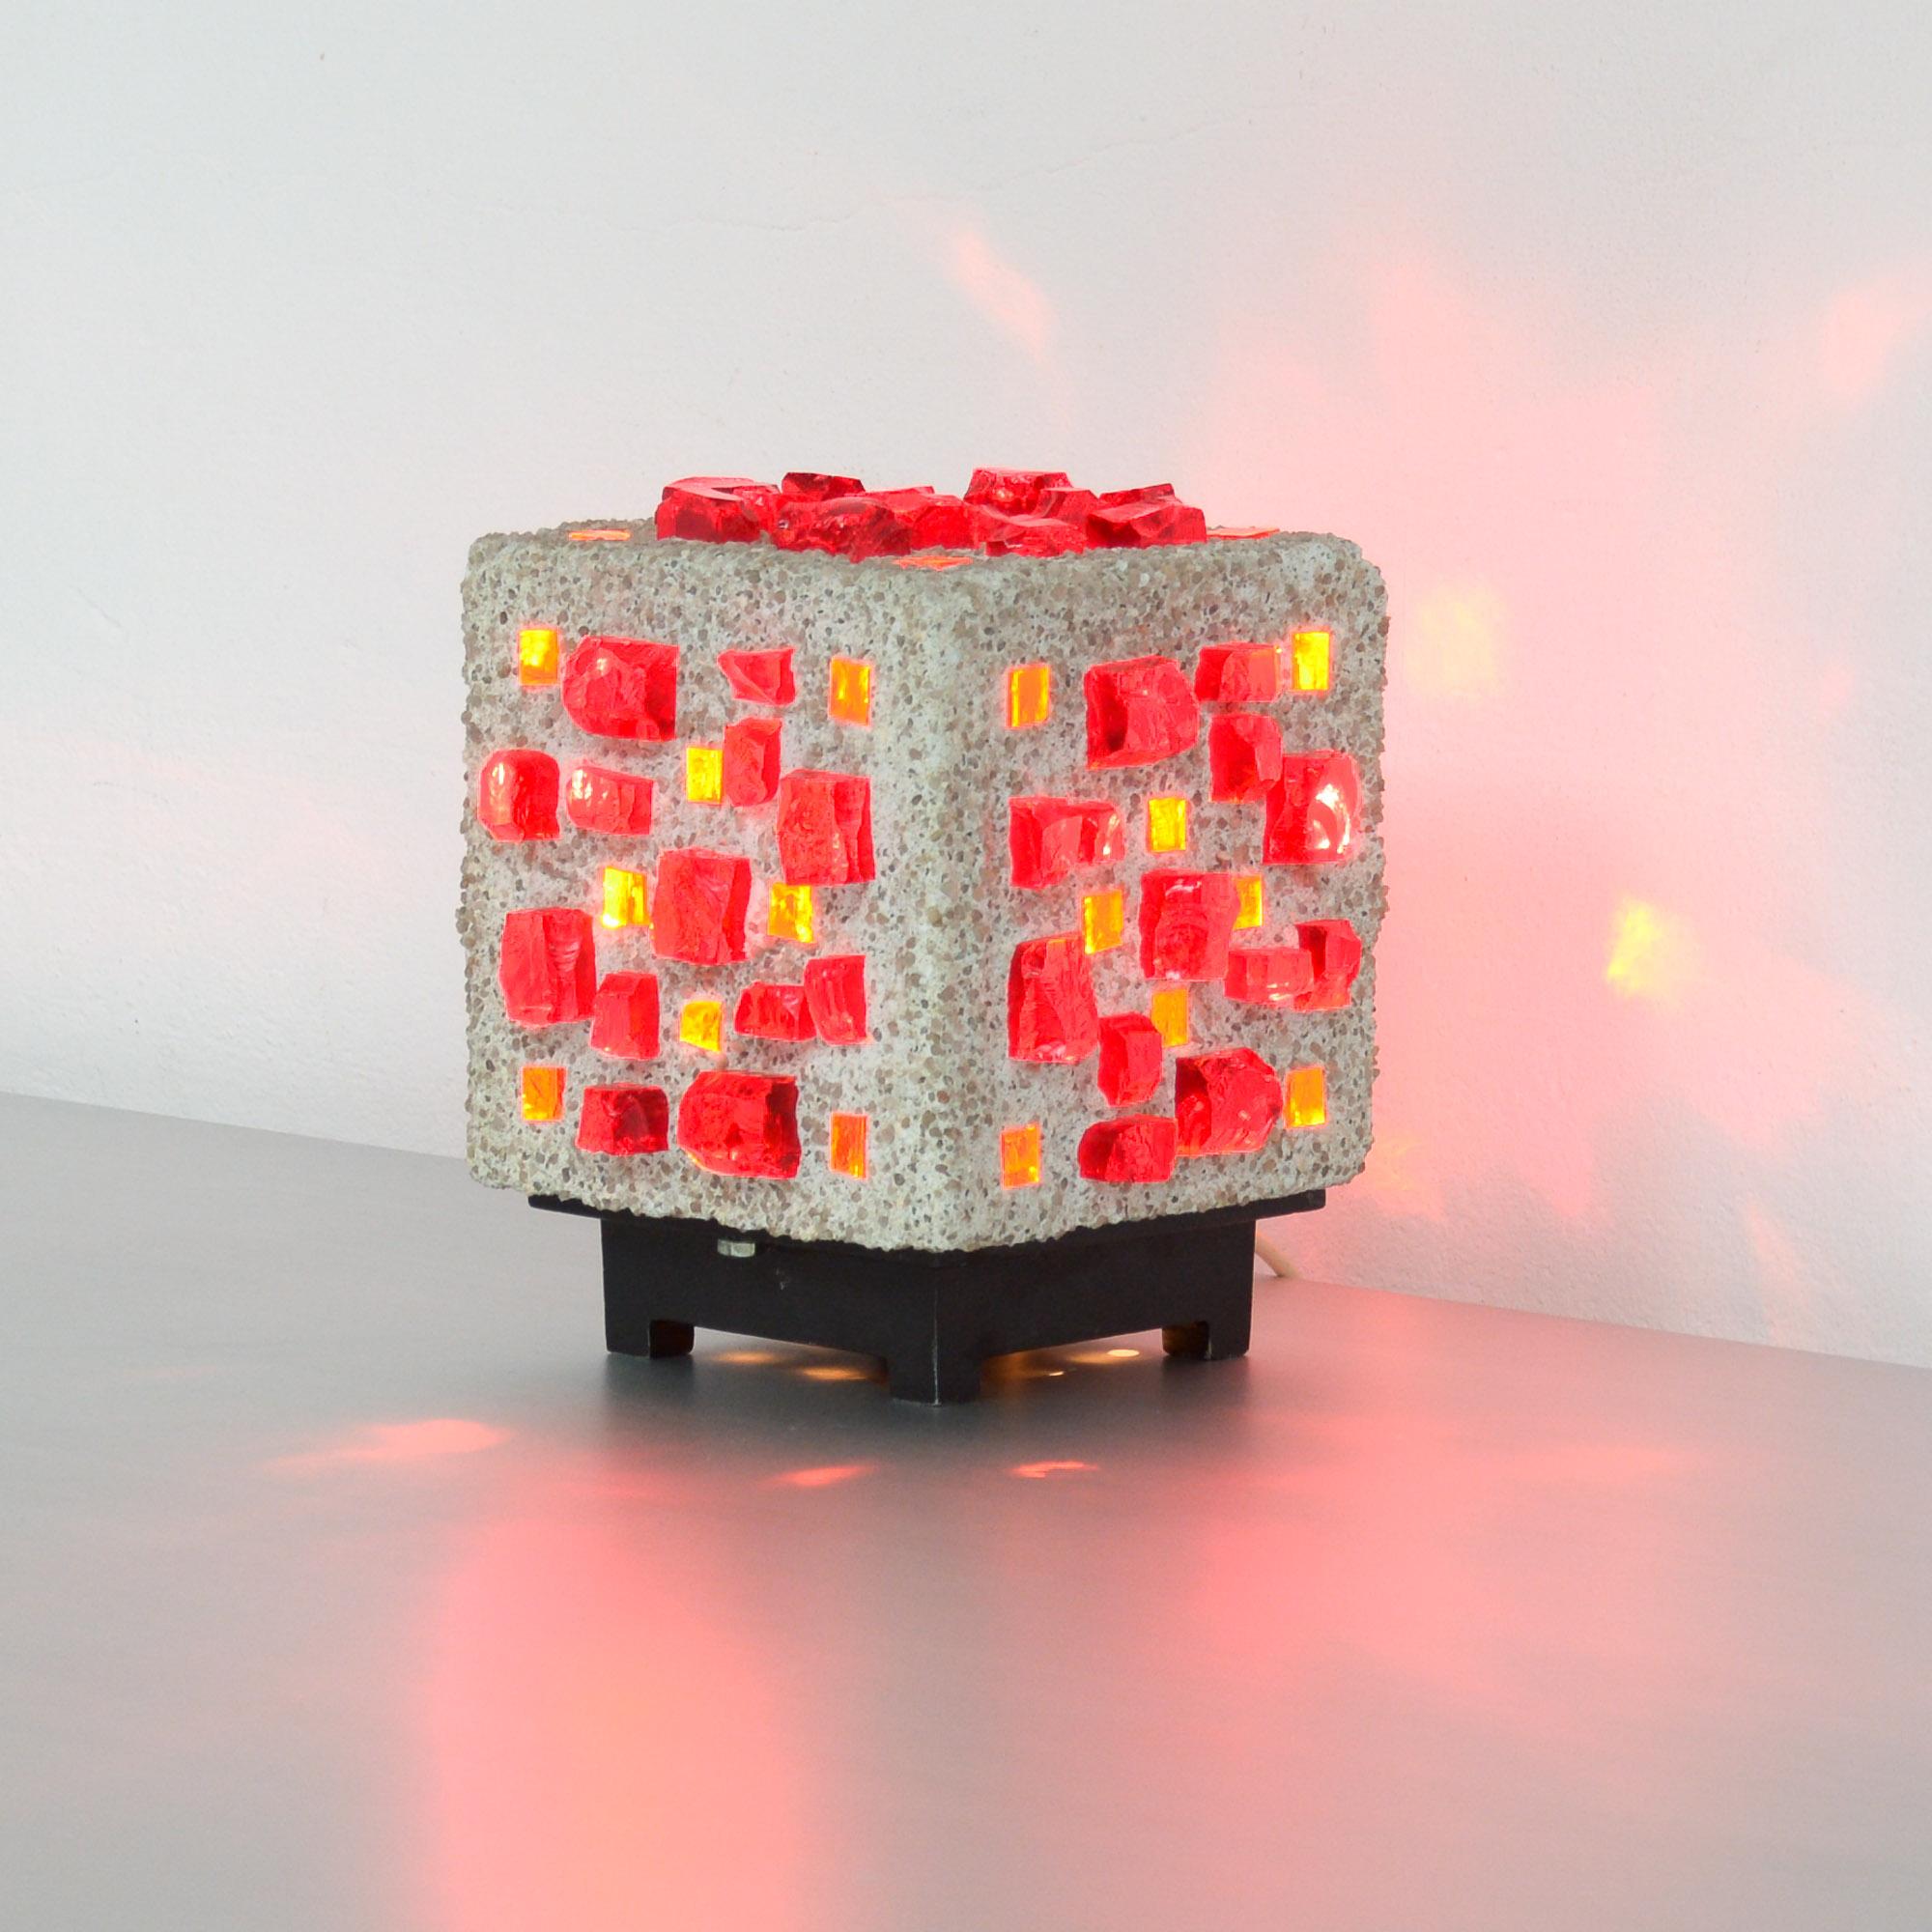 This Brutalist cube table lamp can be dated in the 1960s.
It is made of concrete and thick broken glass pieces in different shades of red.
The lamp was inspired by the Brutalist architecture and the stained glass windows of Le Corbusier.
It is a